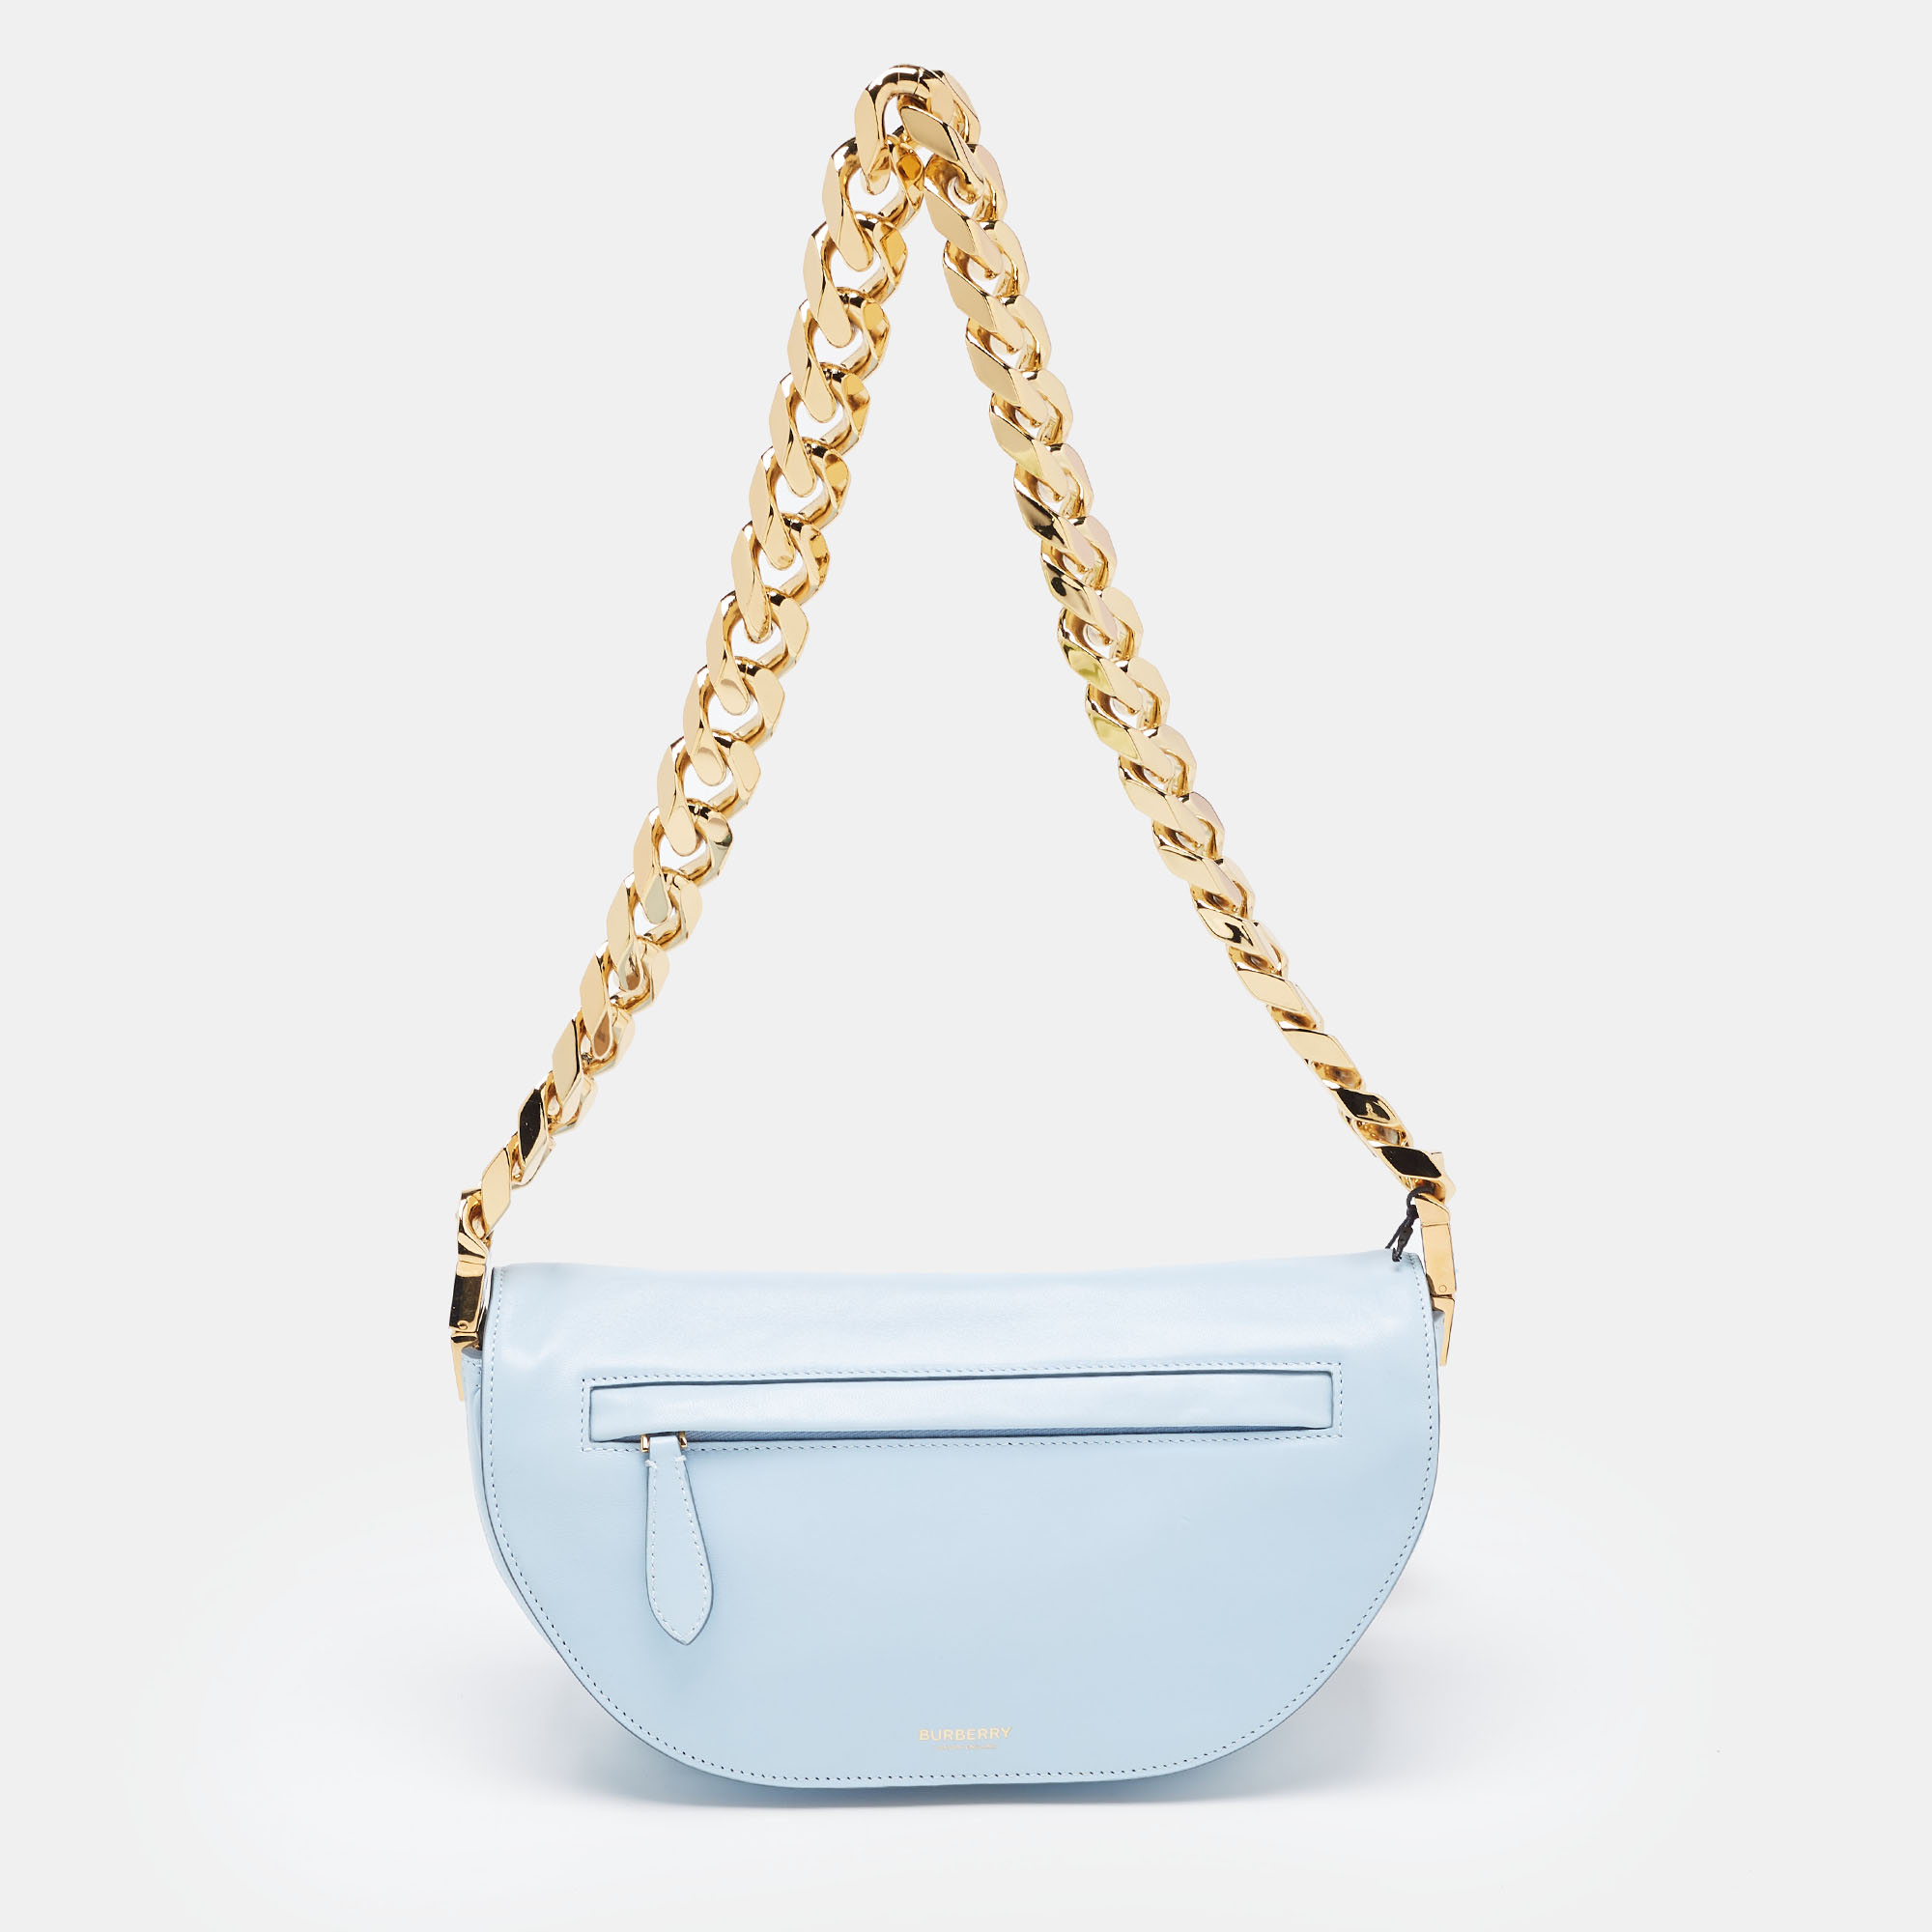 Burberry pale blue leather small olympia chain shoulder bag